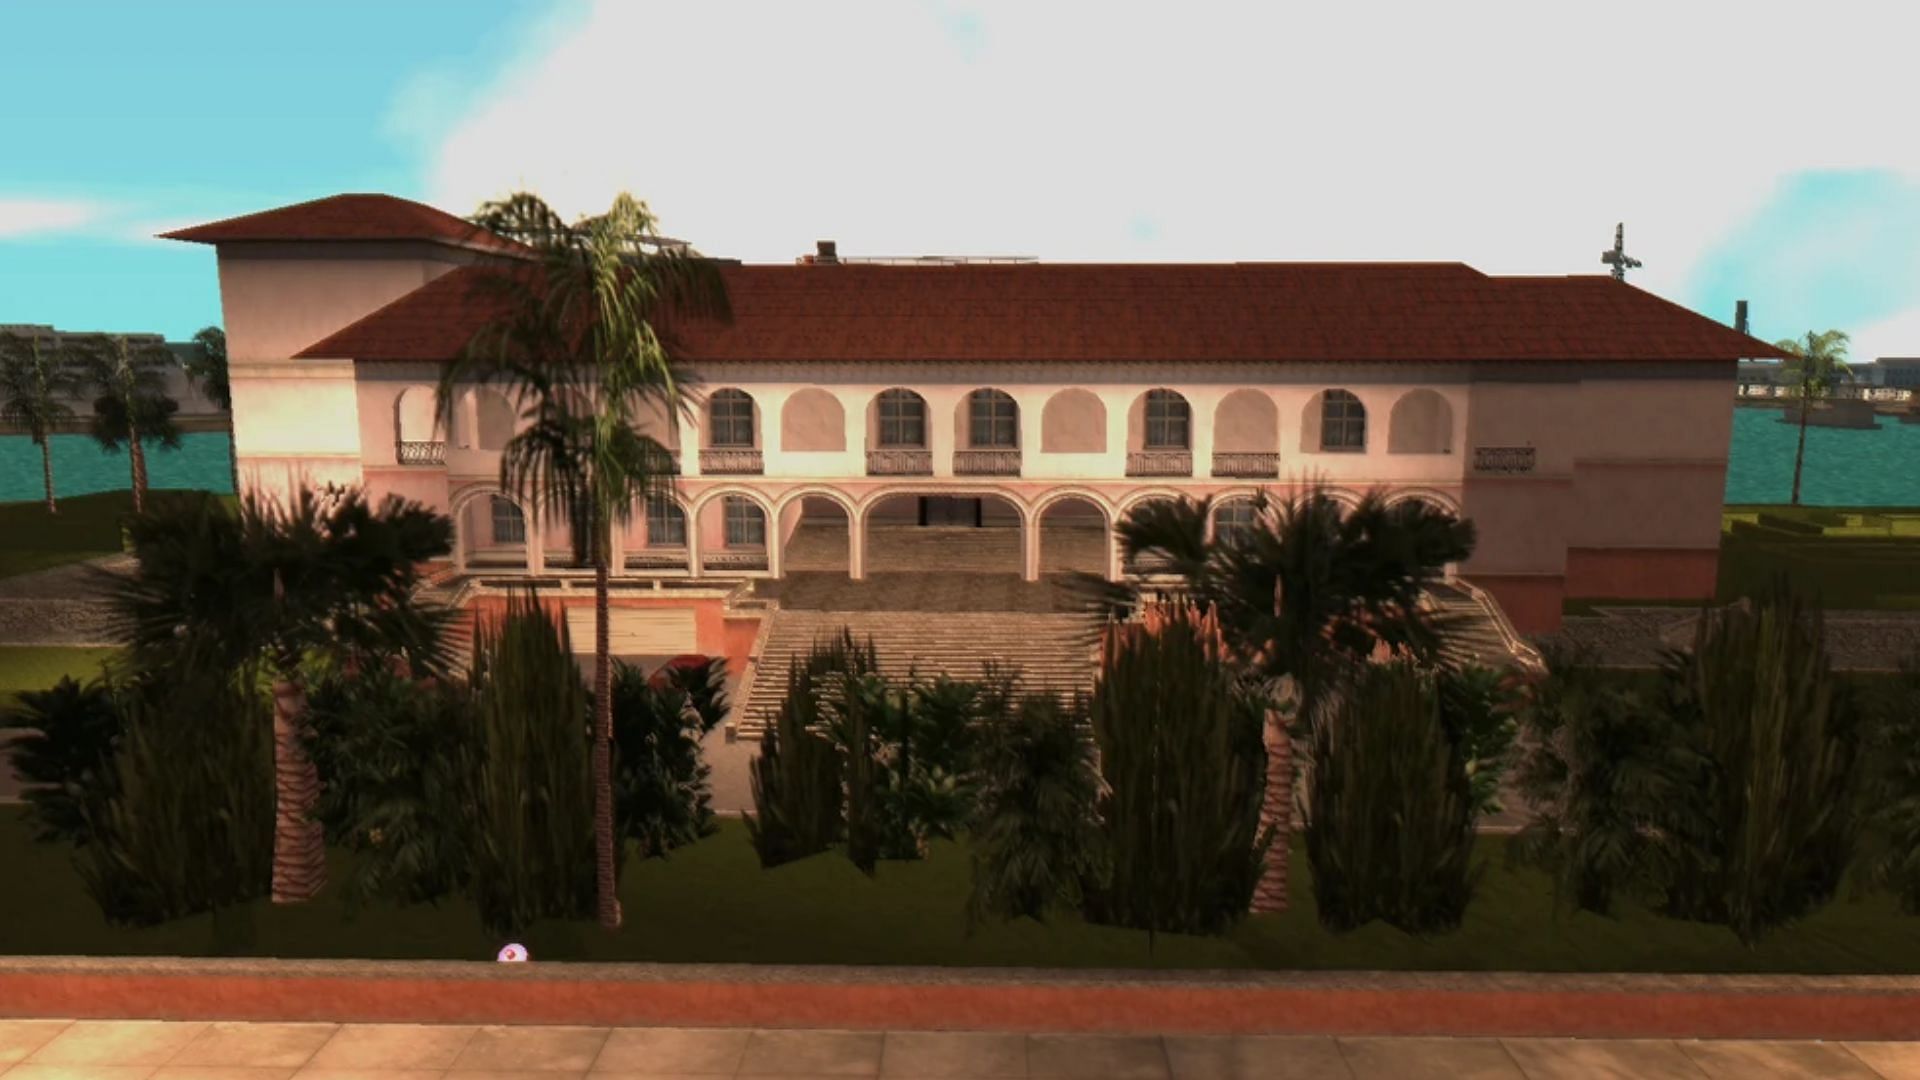 Vercetti Estate in Vice City holds a strong emotion. (Image via GTA Wiki)